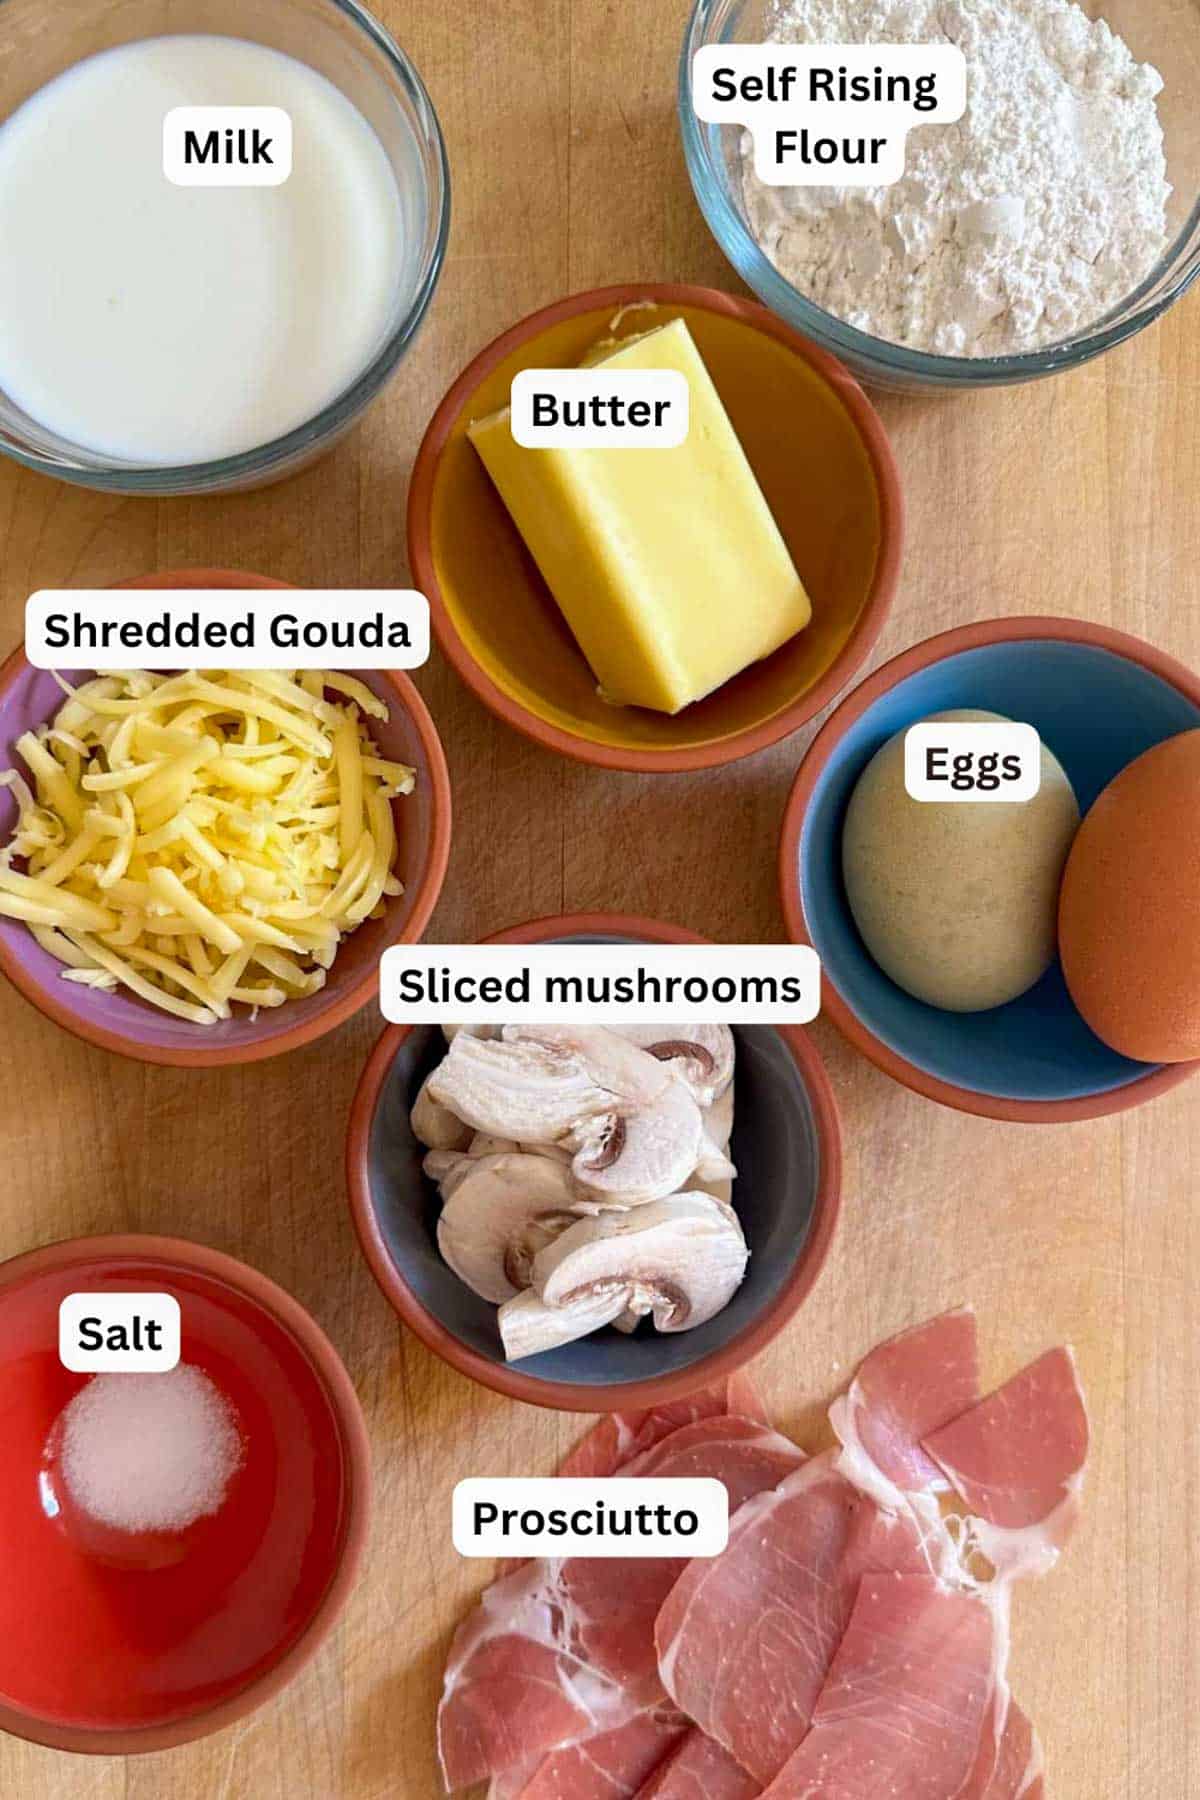 The ingredients needed to make this savory pancake including milk, flour, butter, gouda, eggs, mushrooms, salt, and prosciutto.